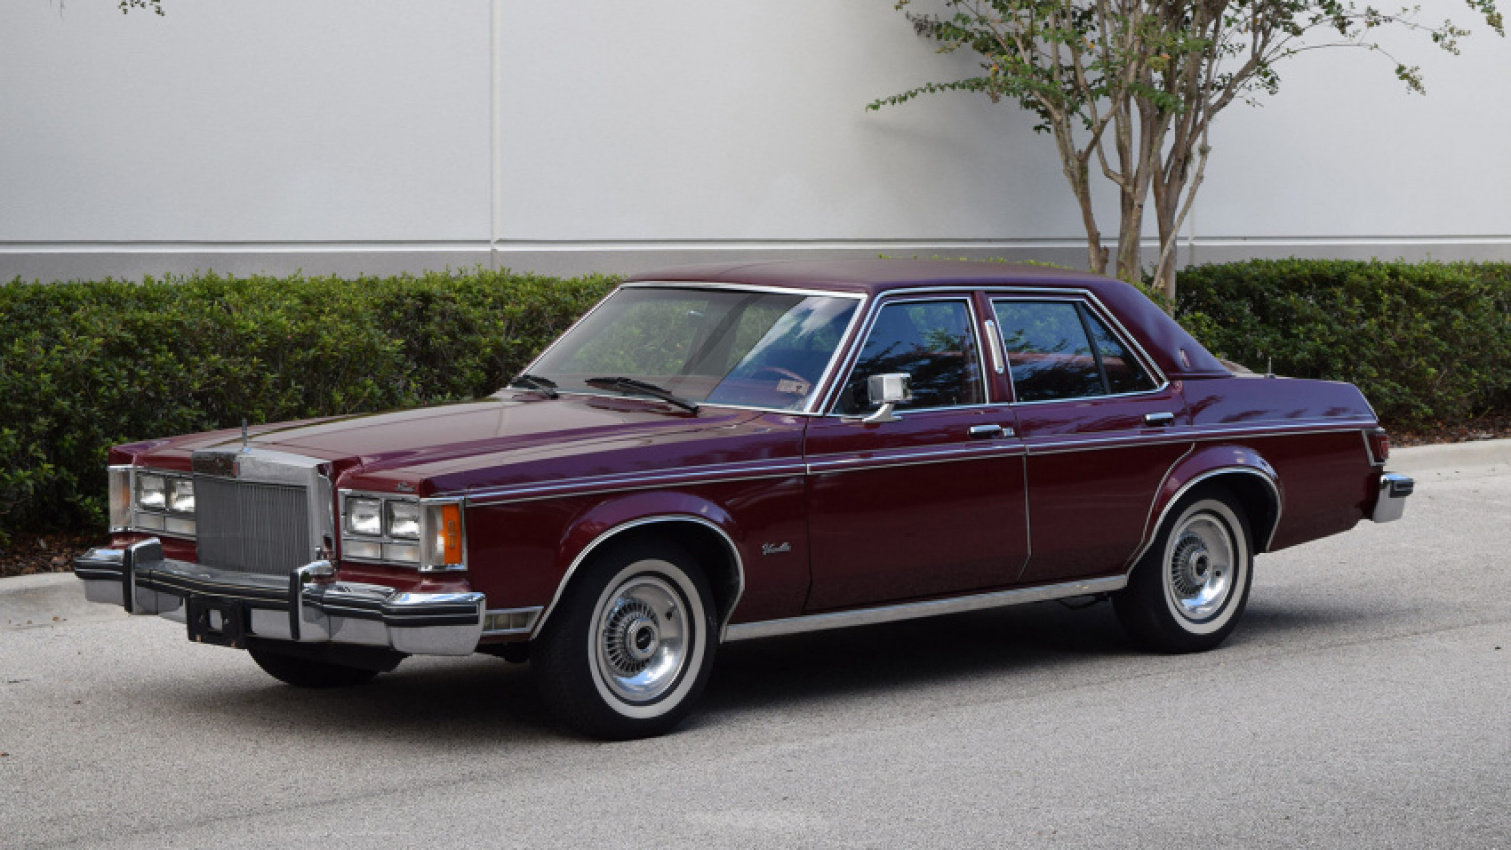 autos, cars, classic cars, lincoln, 1977 lincoln versailles, lincoln versailles, 1977 lincoln versailles